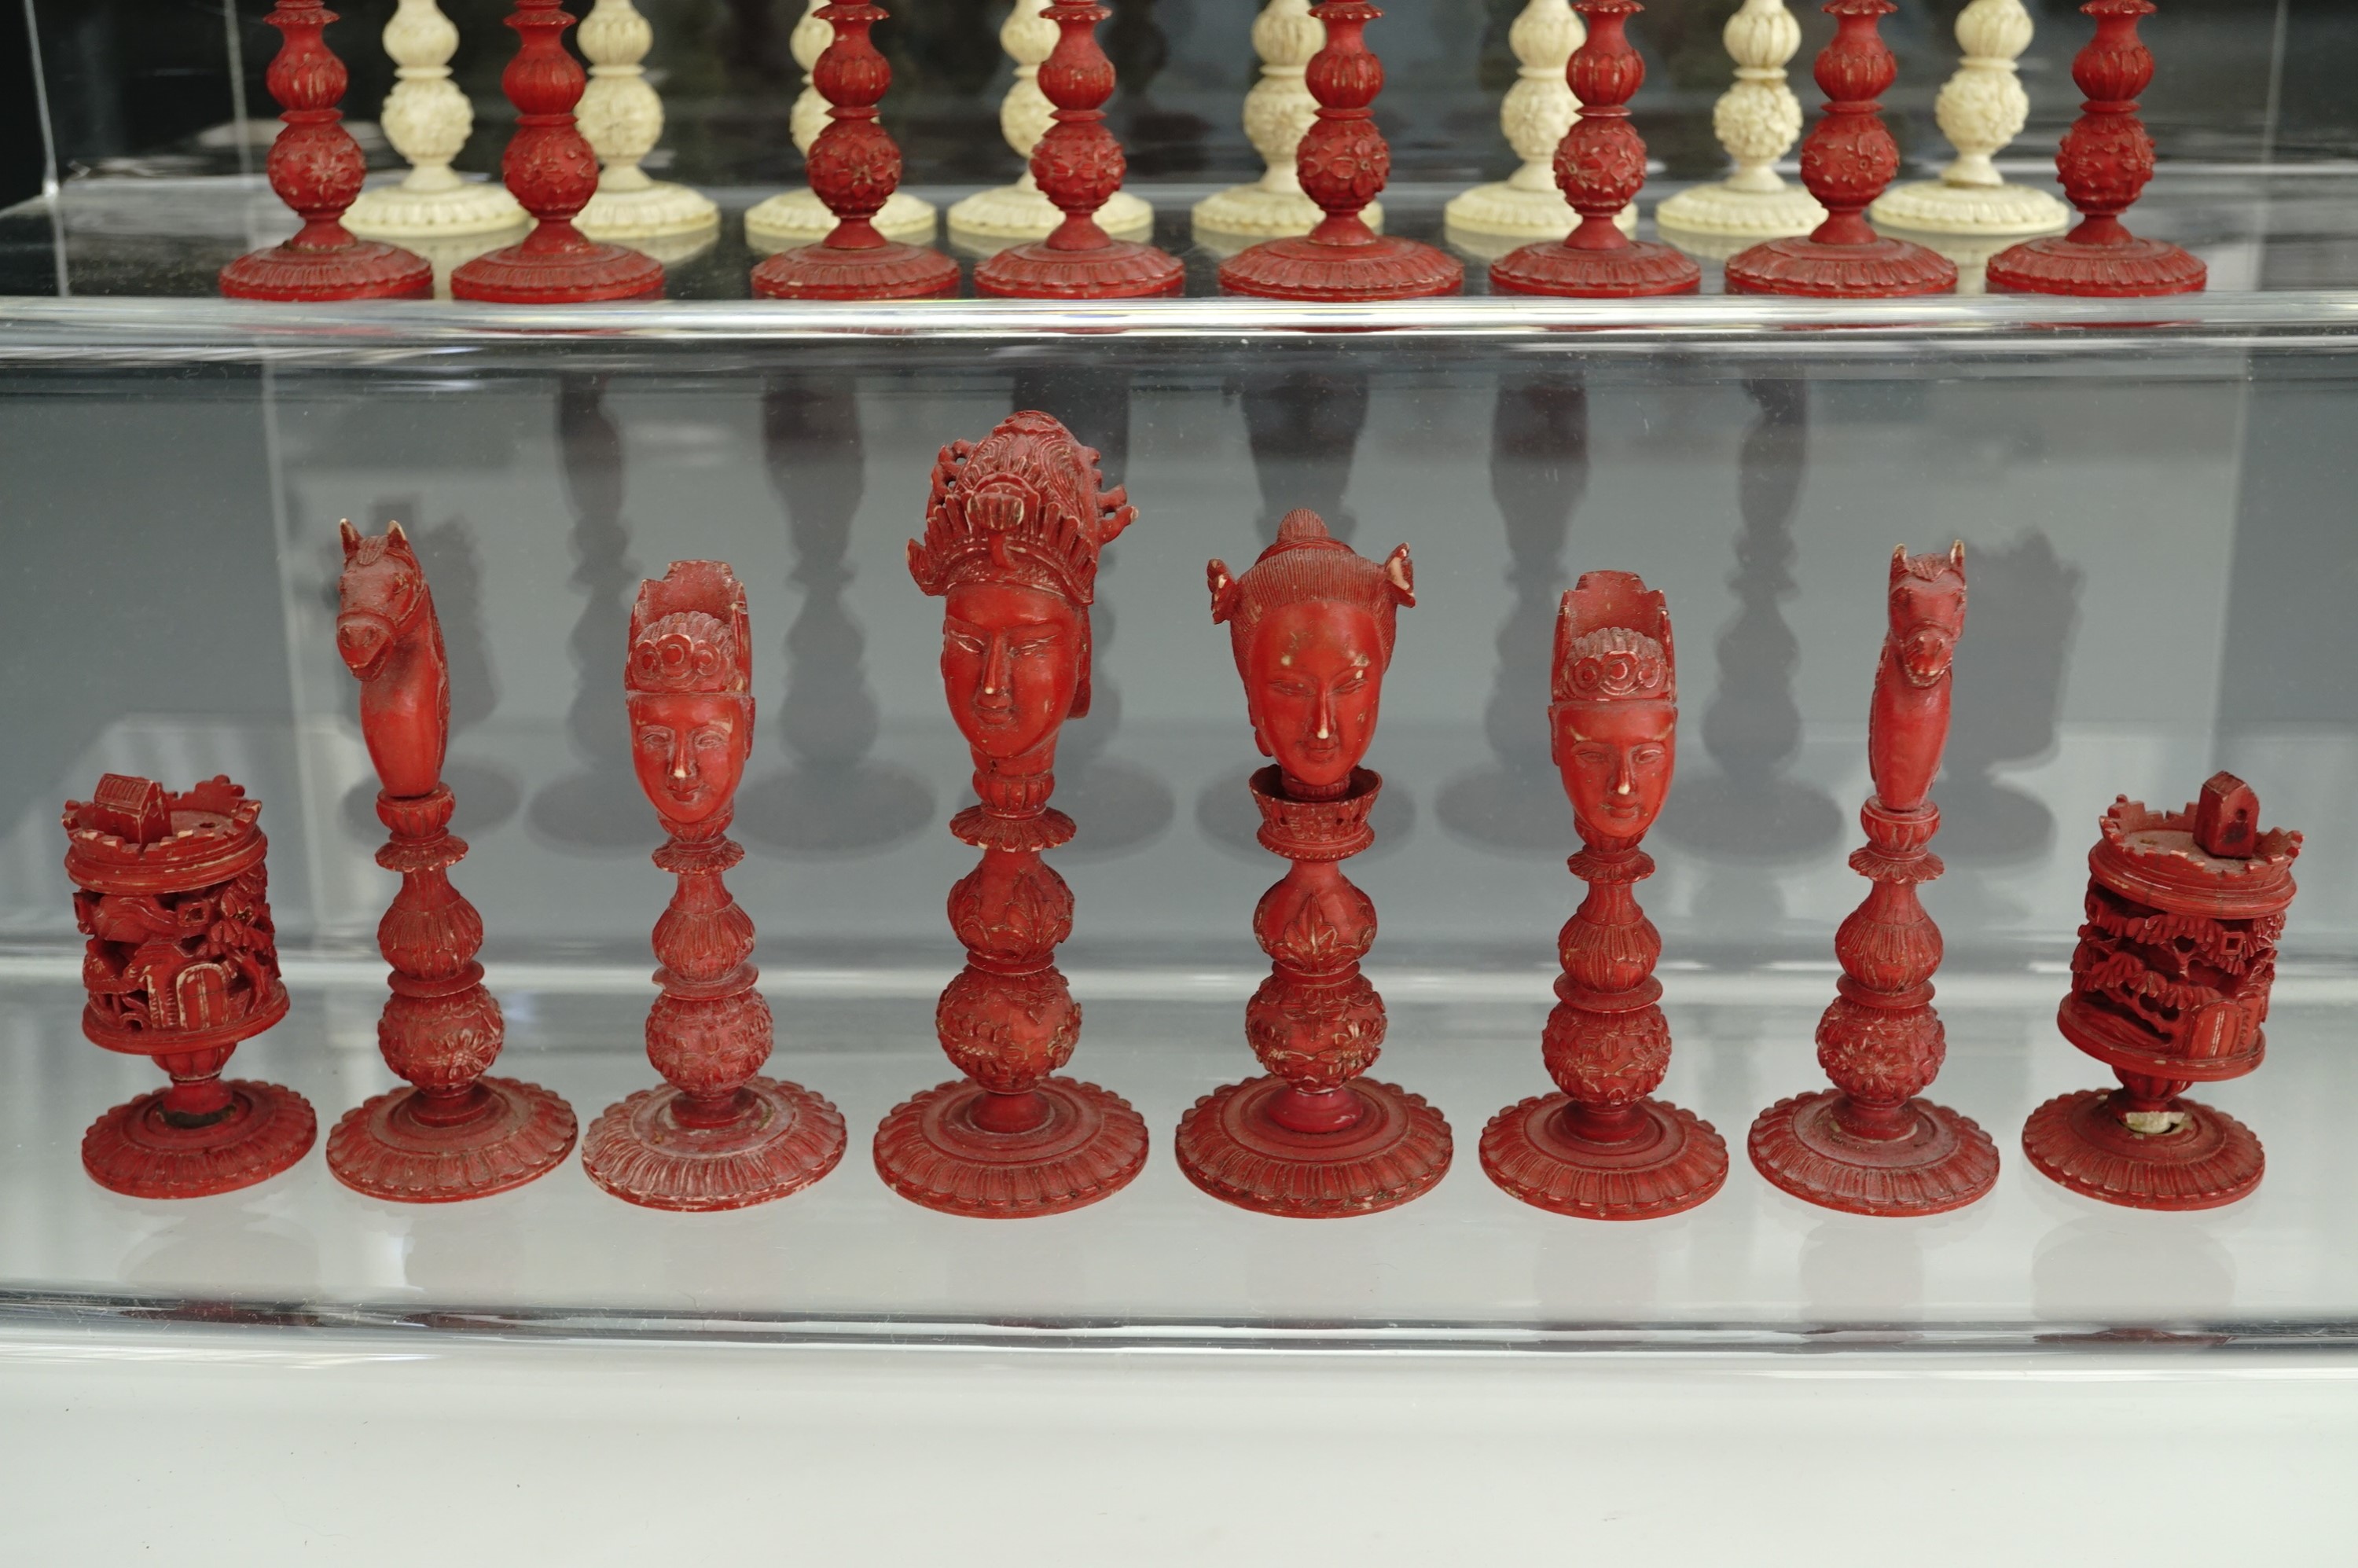 A late 18th / early 19th Century Chinese / Canton export ivory chess set, likely Macau, Kings - Image 4 of 7